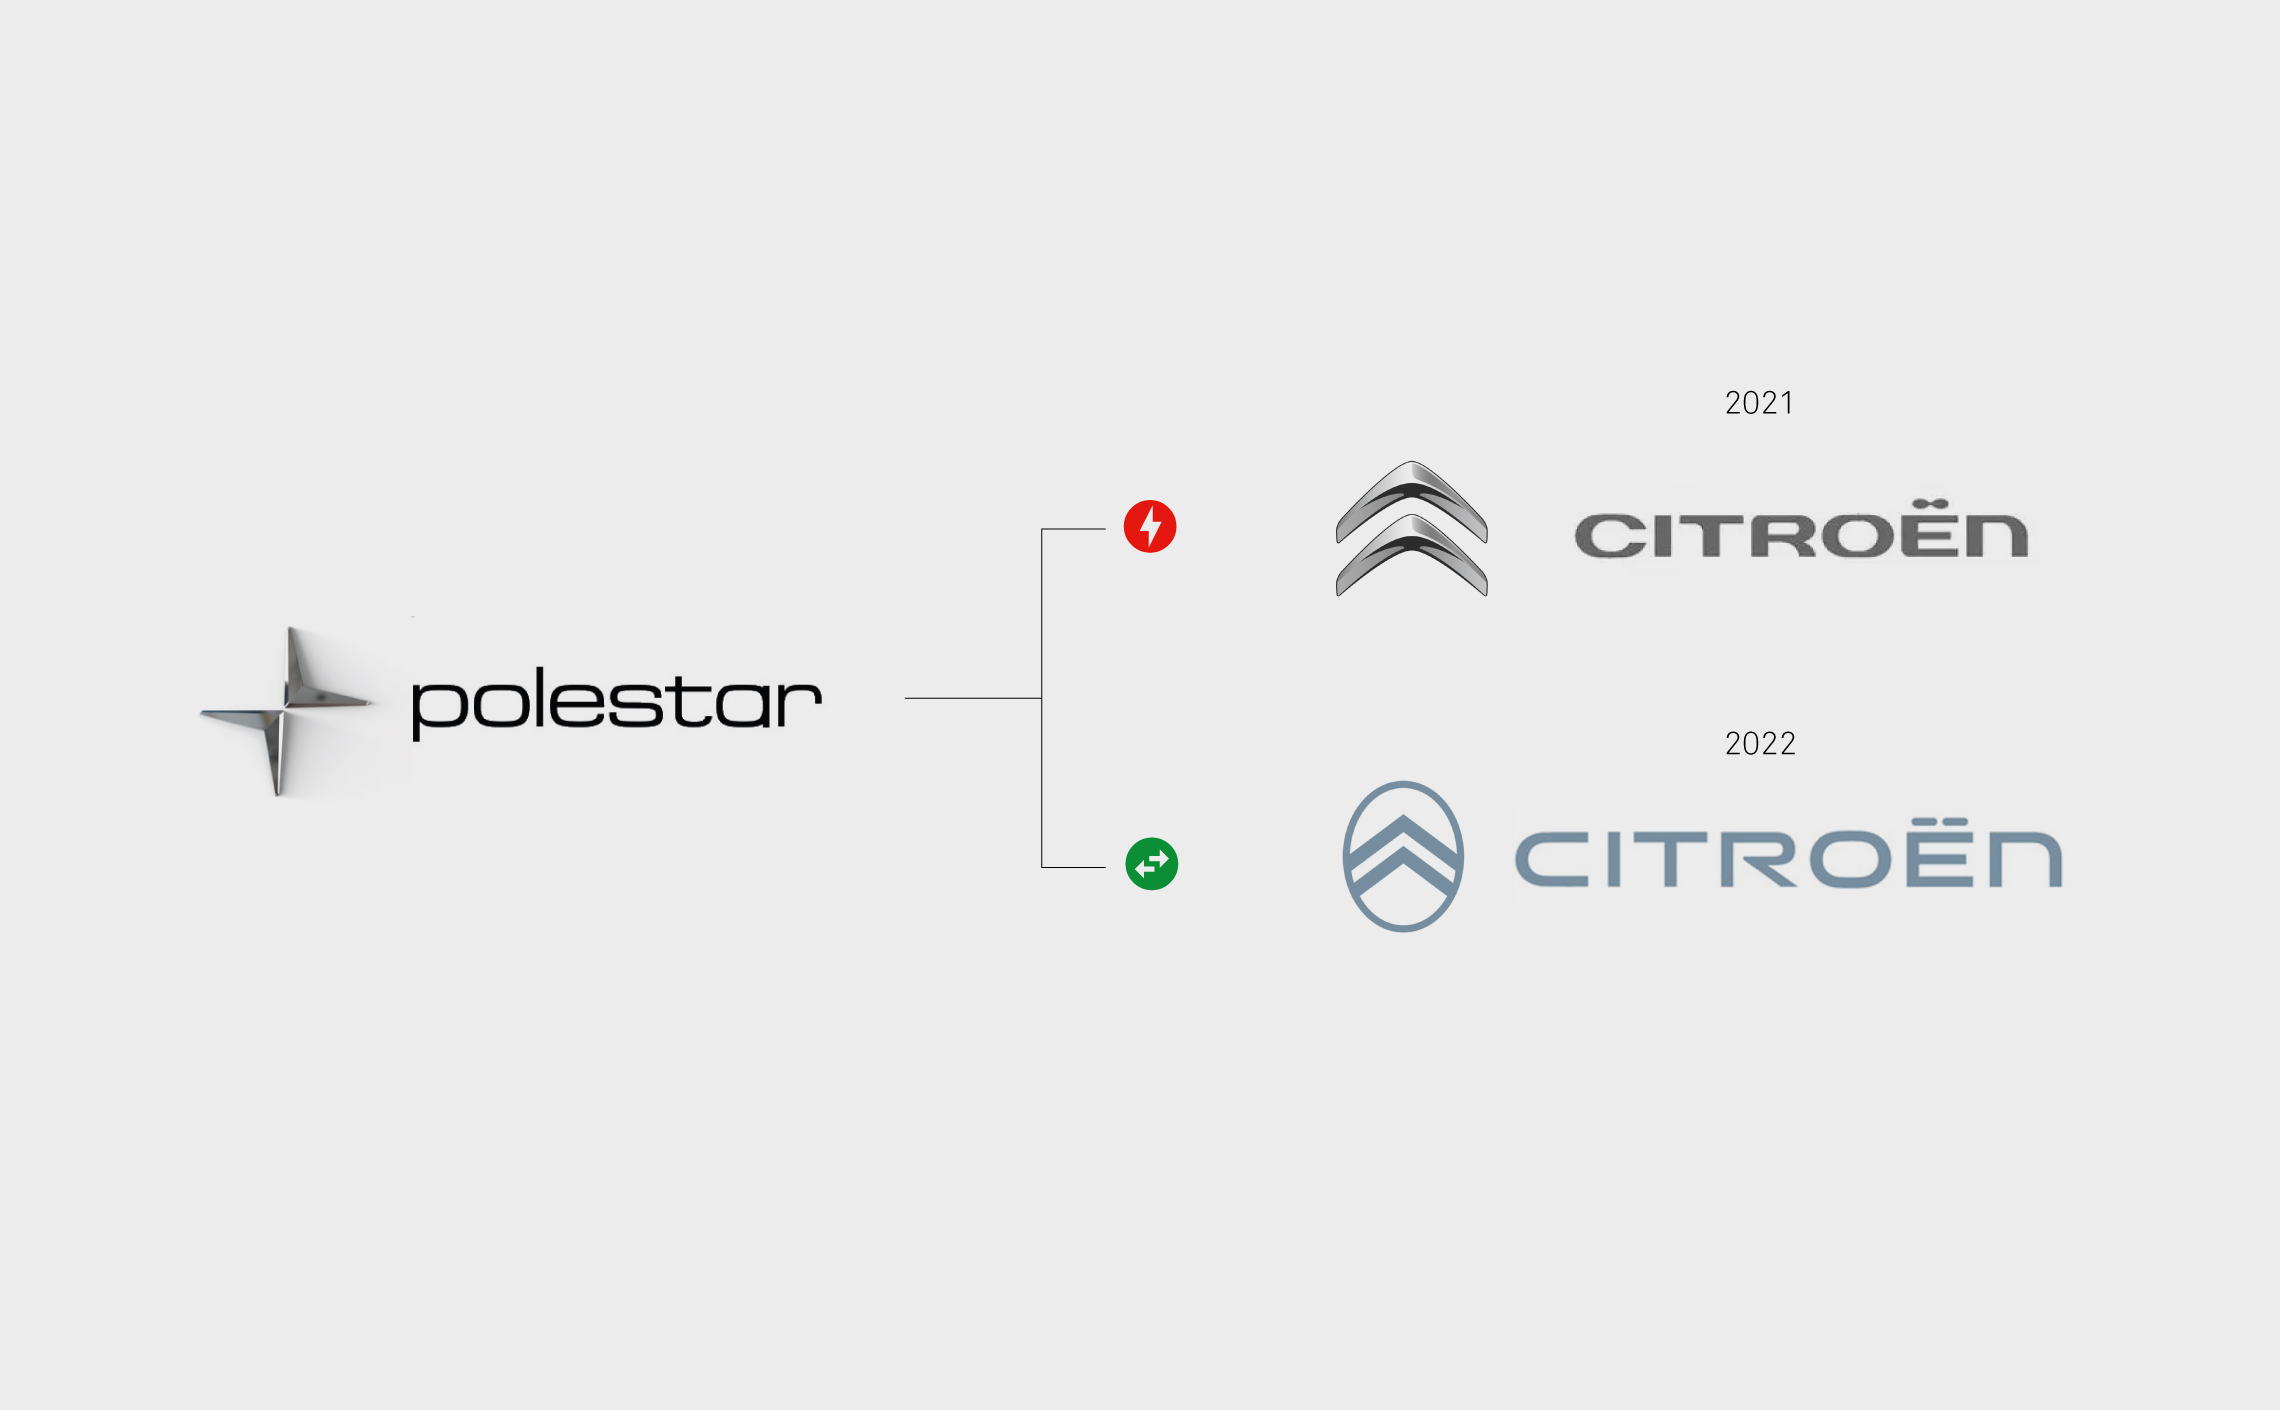 Back to the future for the new Citroën logo